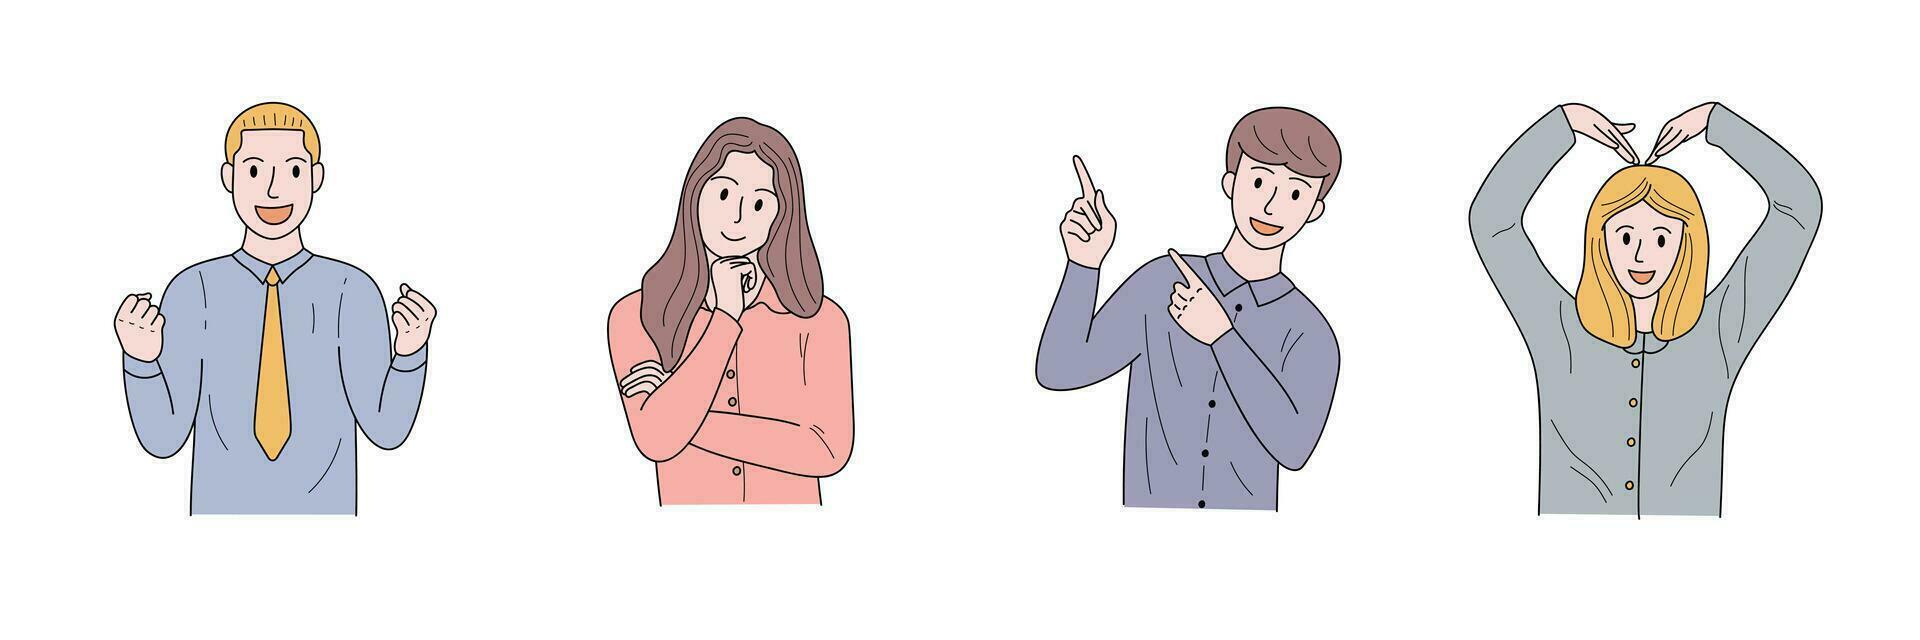 People characters portrait illustration. Set of male and female in different poses, smile, pointing, love, office concept, hairstyle and clothes. Minimal style young adults for ads, print, decorative. vector